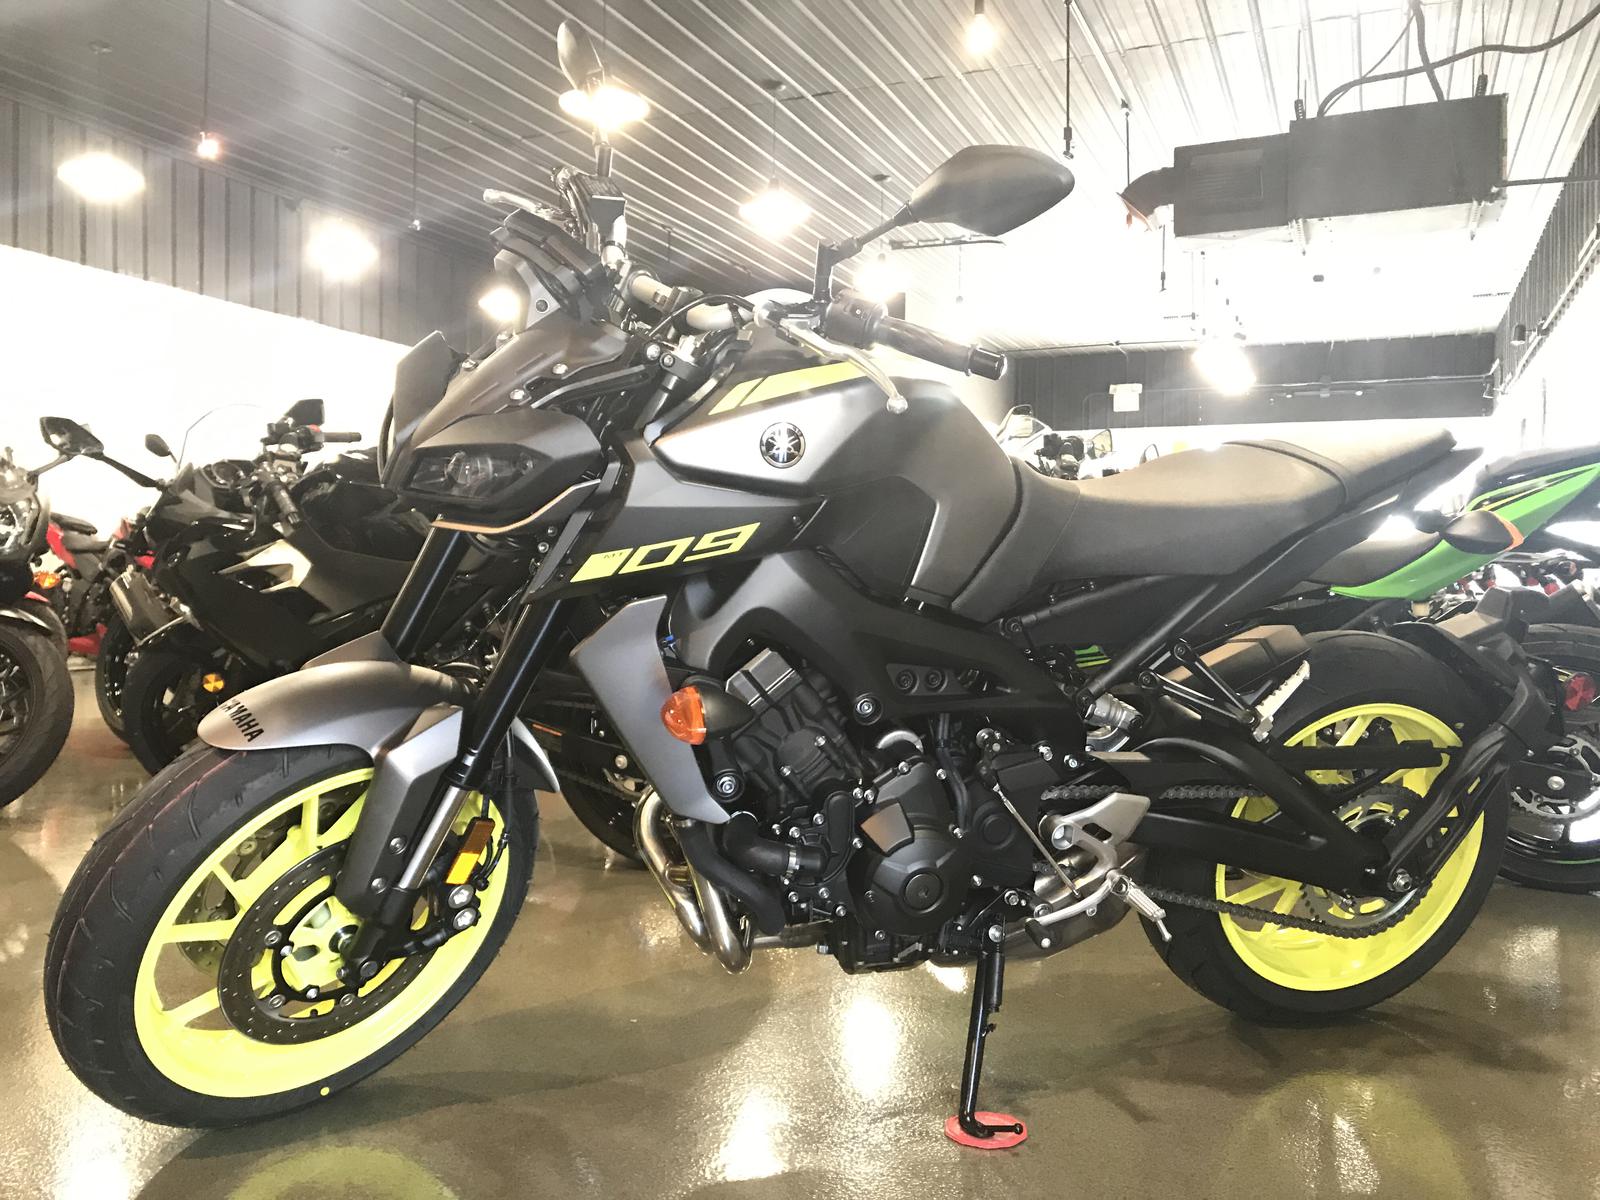 2018 Yamaha Mt 09 For Sale In Urbana, Il - Motorcycle , HD Wallpaper & Backgrounds